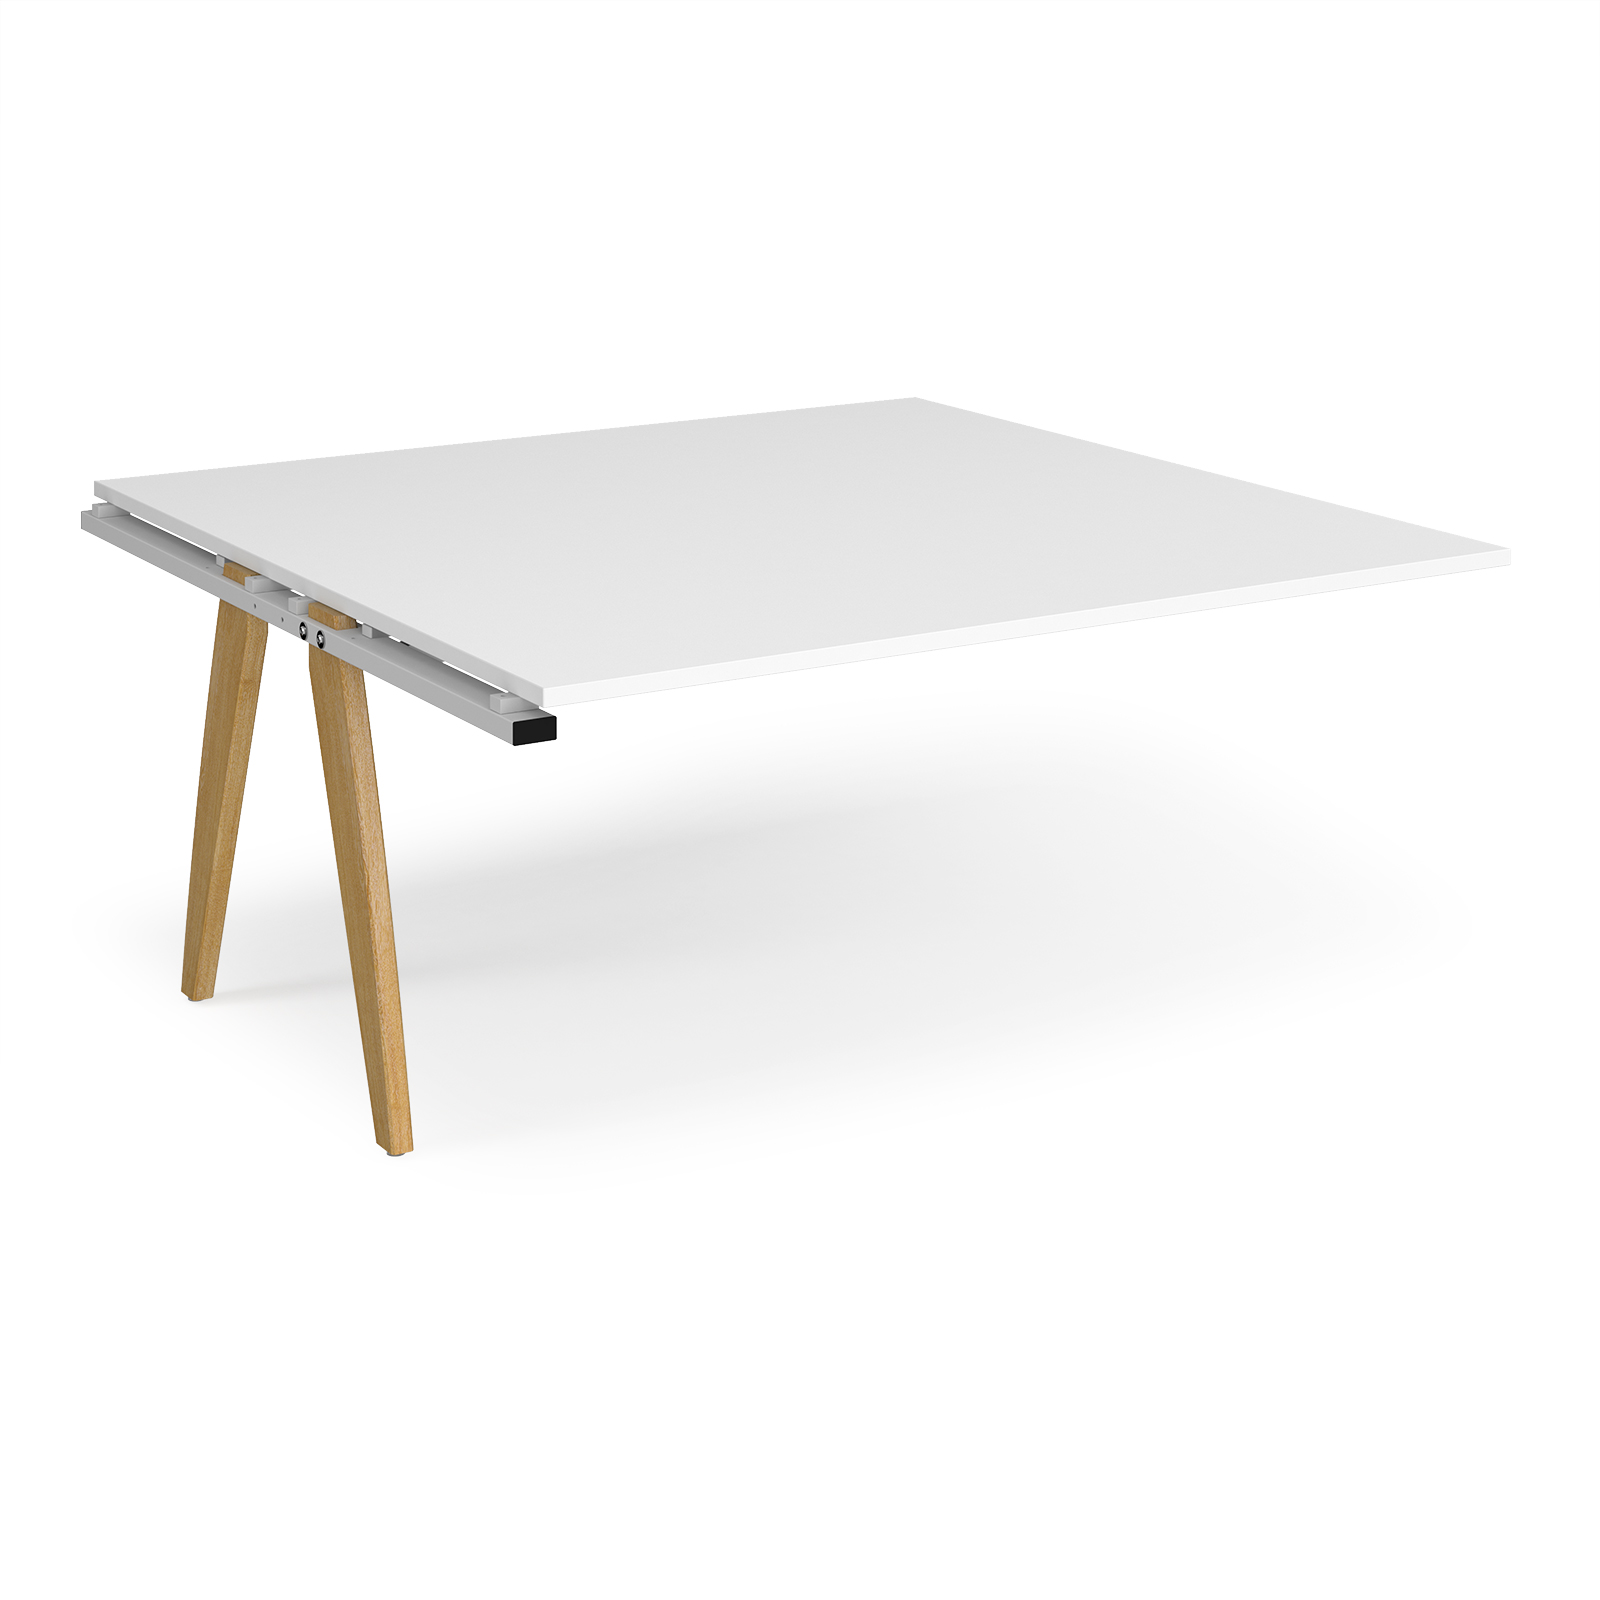 Fuze boardroom table add on unit 1600mm x 1600mm - white frame, white top